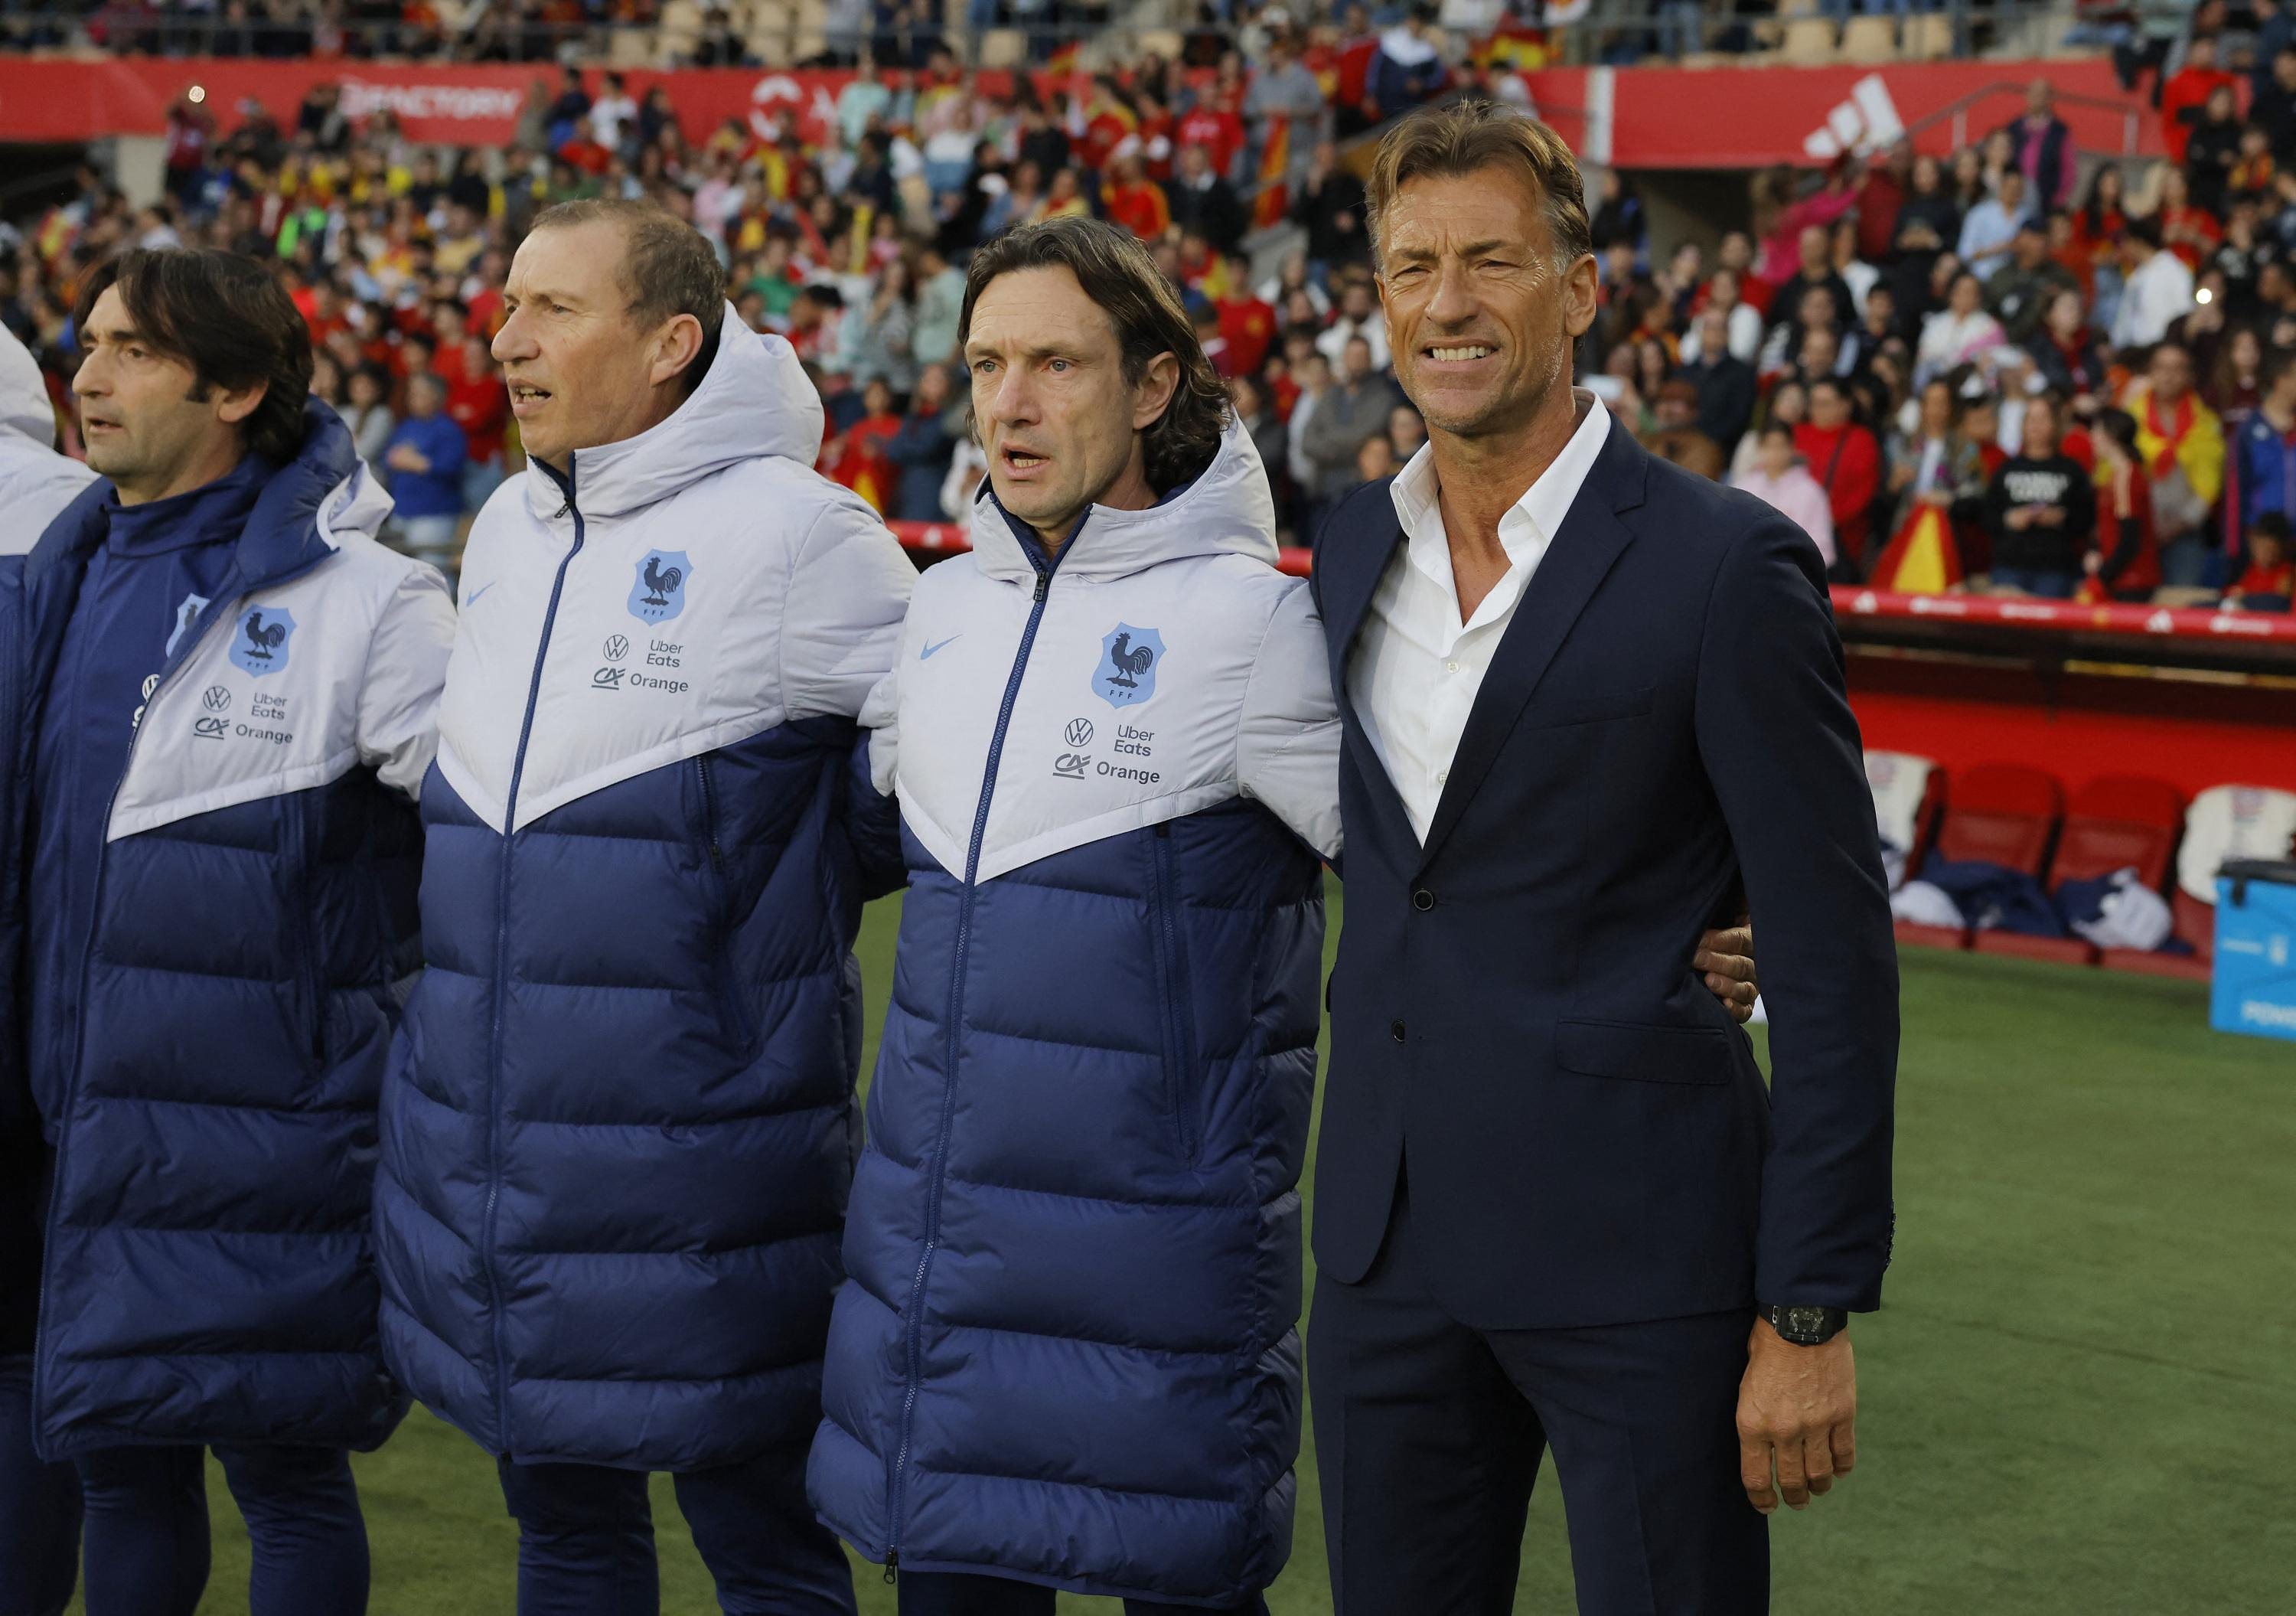 Foot: the president of the FFF confirms that Hervé Renard will leave the Blues after the Olympics